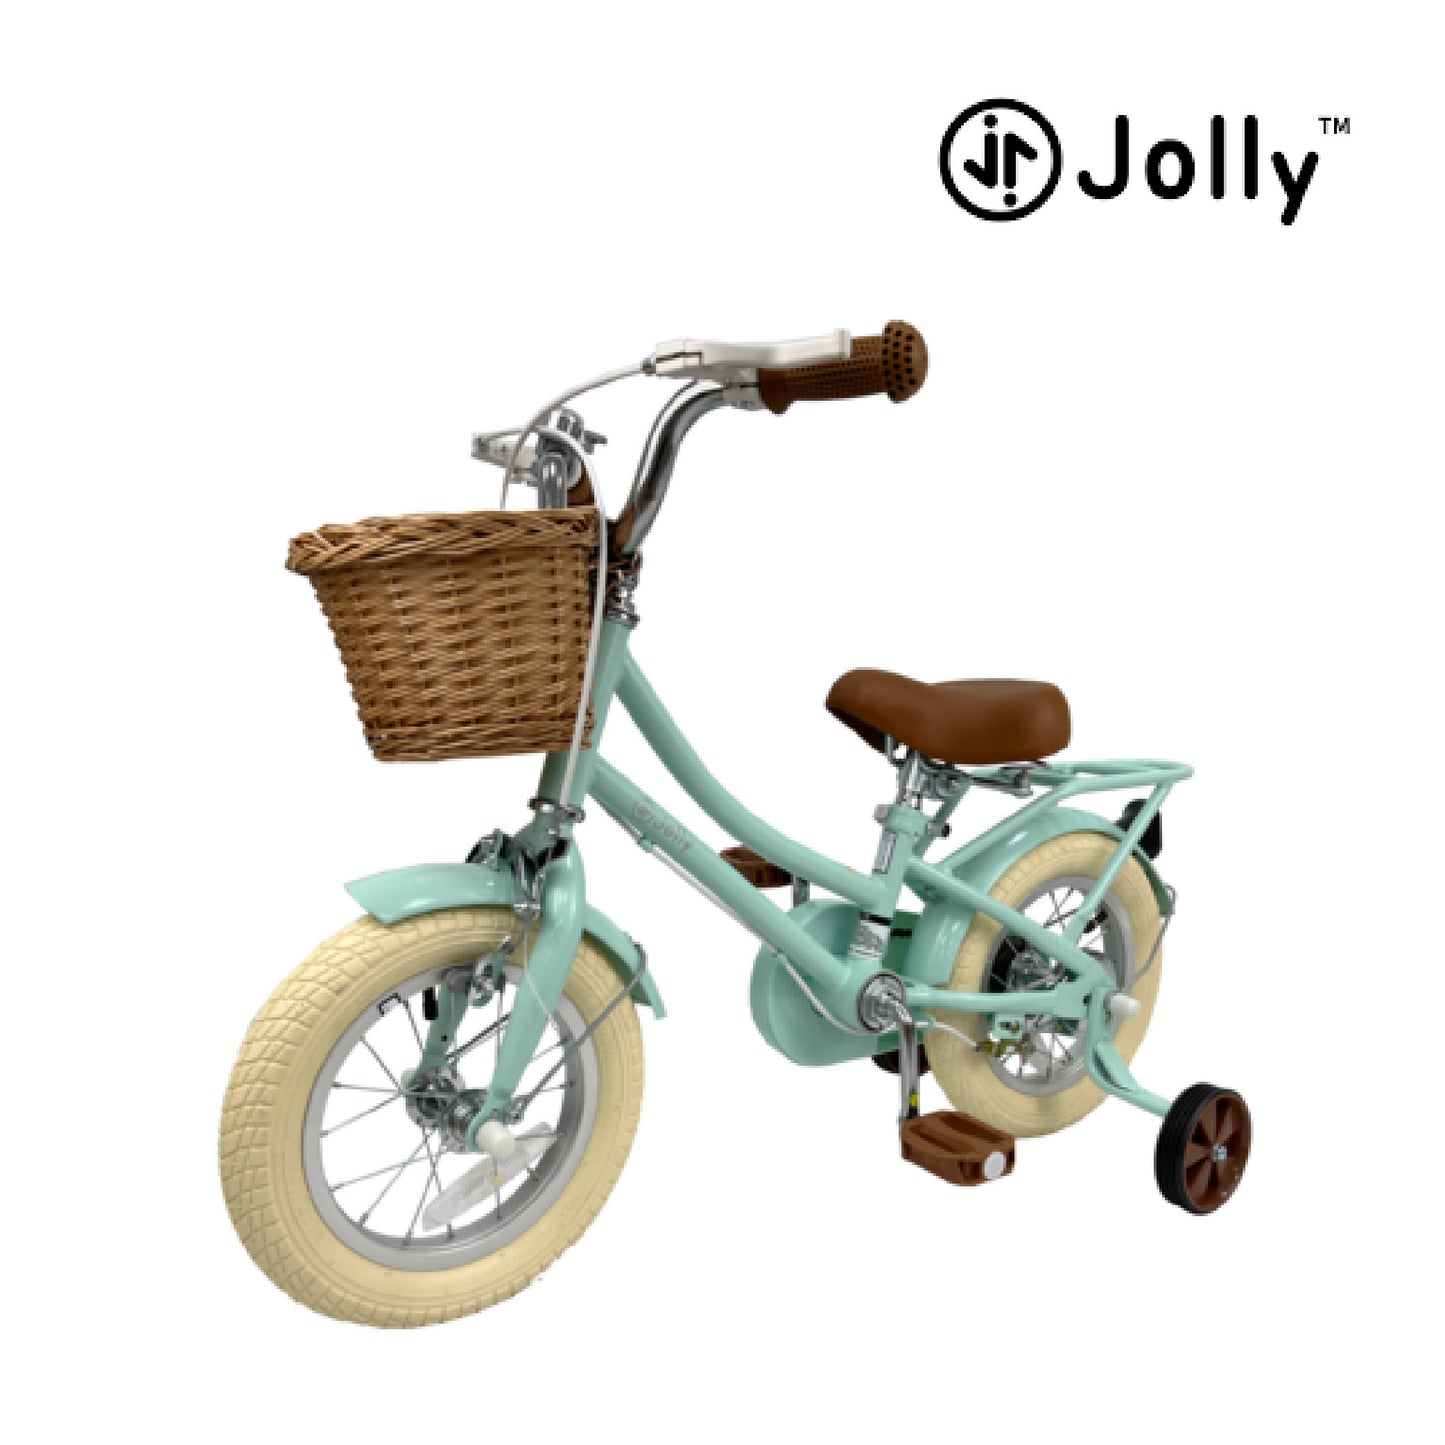 [Jolly UK] Wen Qingfeng children's bicycle - 2 colors available. 12 inches, 14 inches